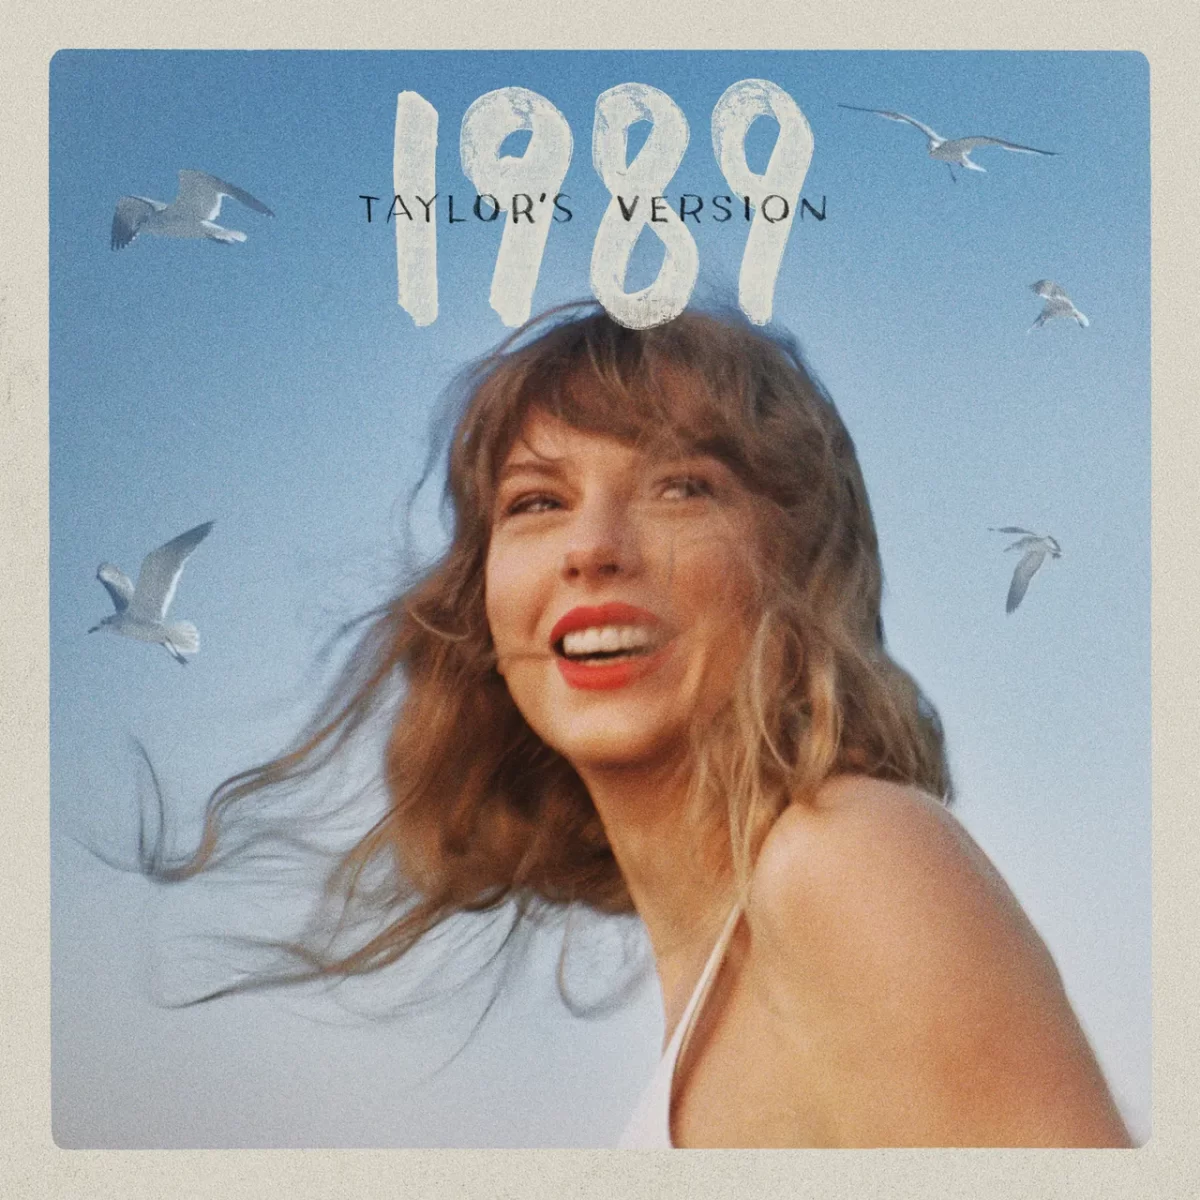 1989+%28Taylors+Version%29%3A+A+disappointing+remake